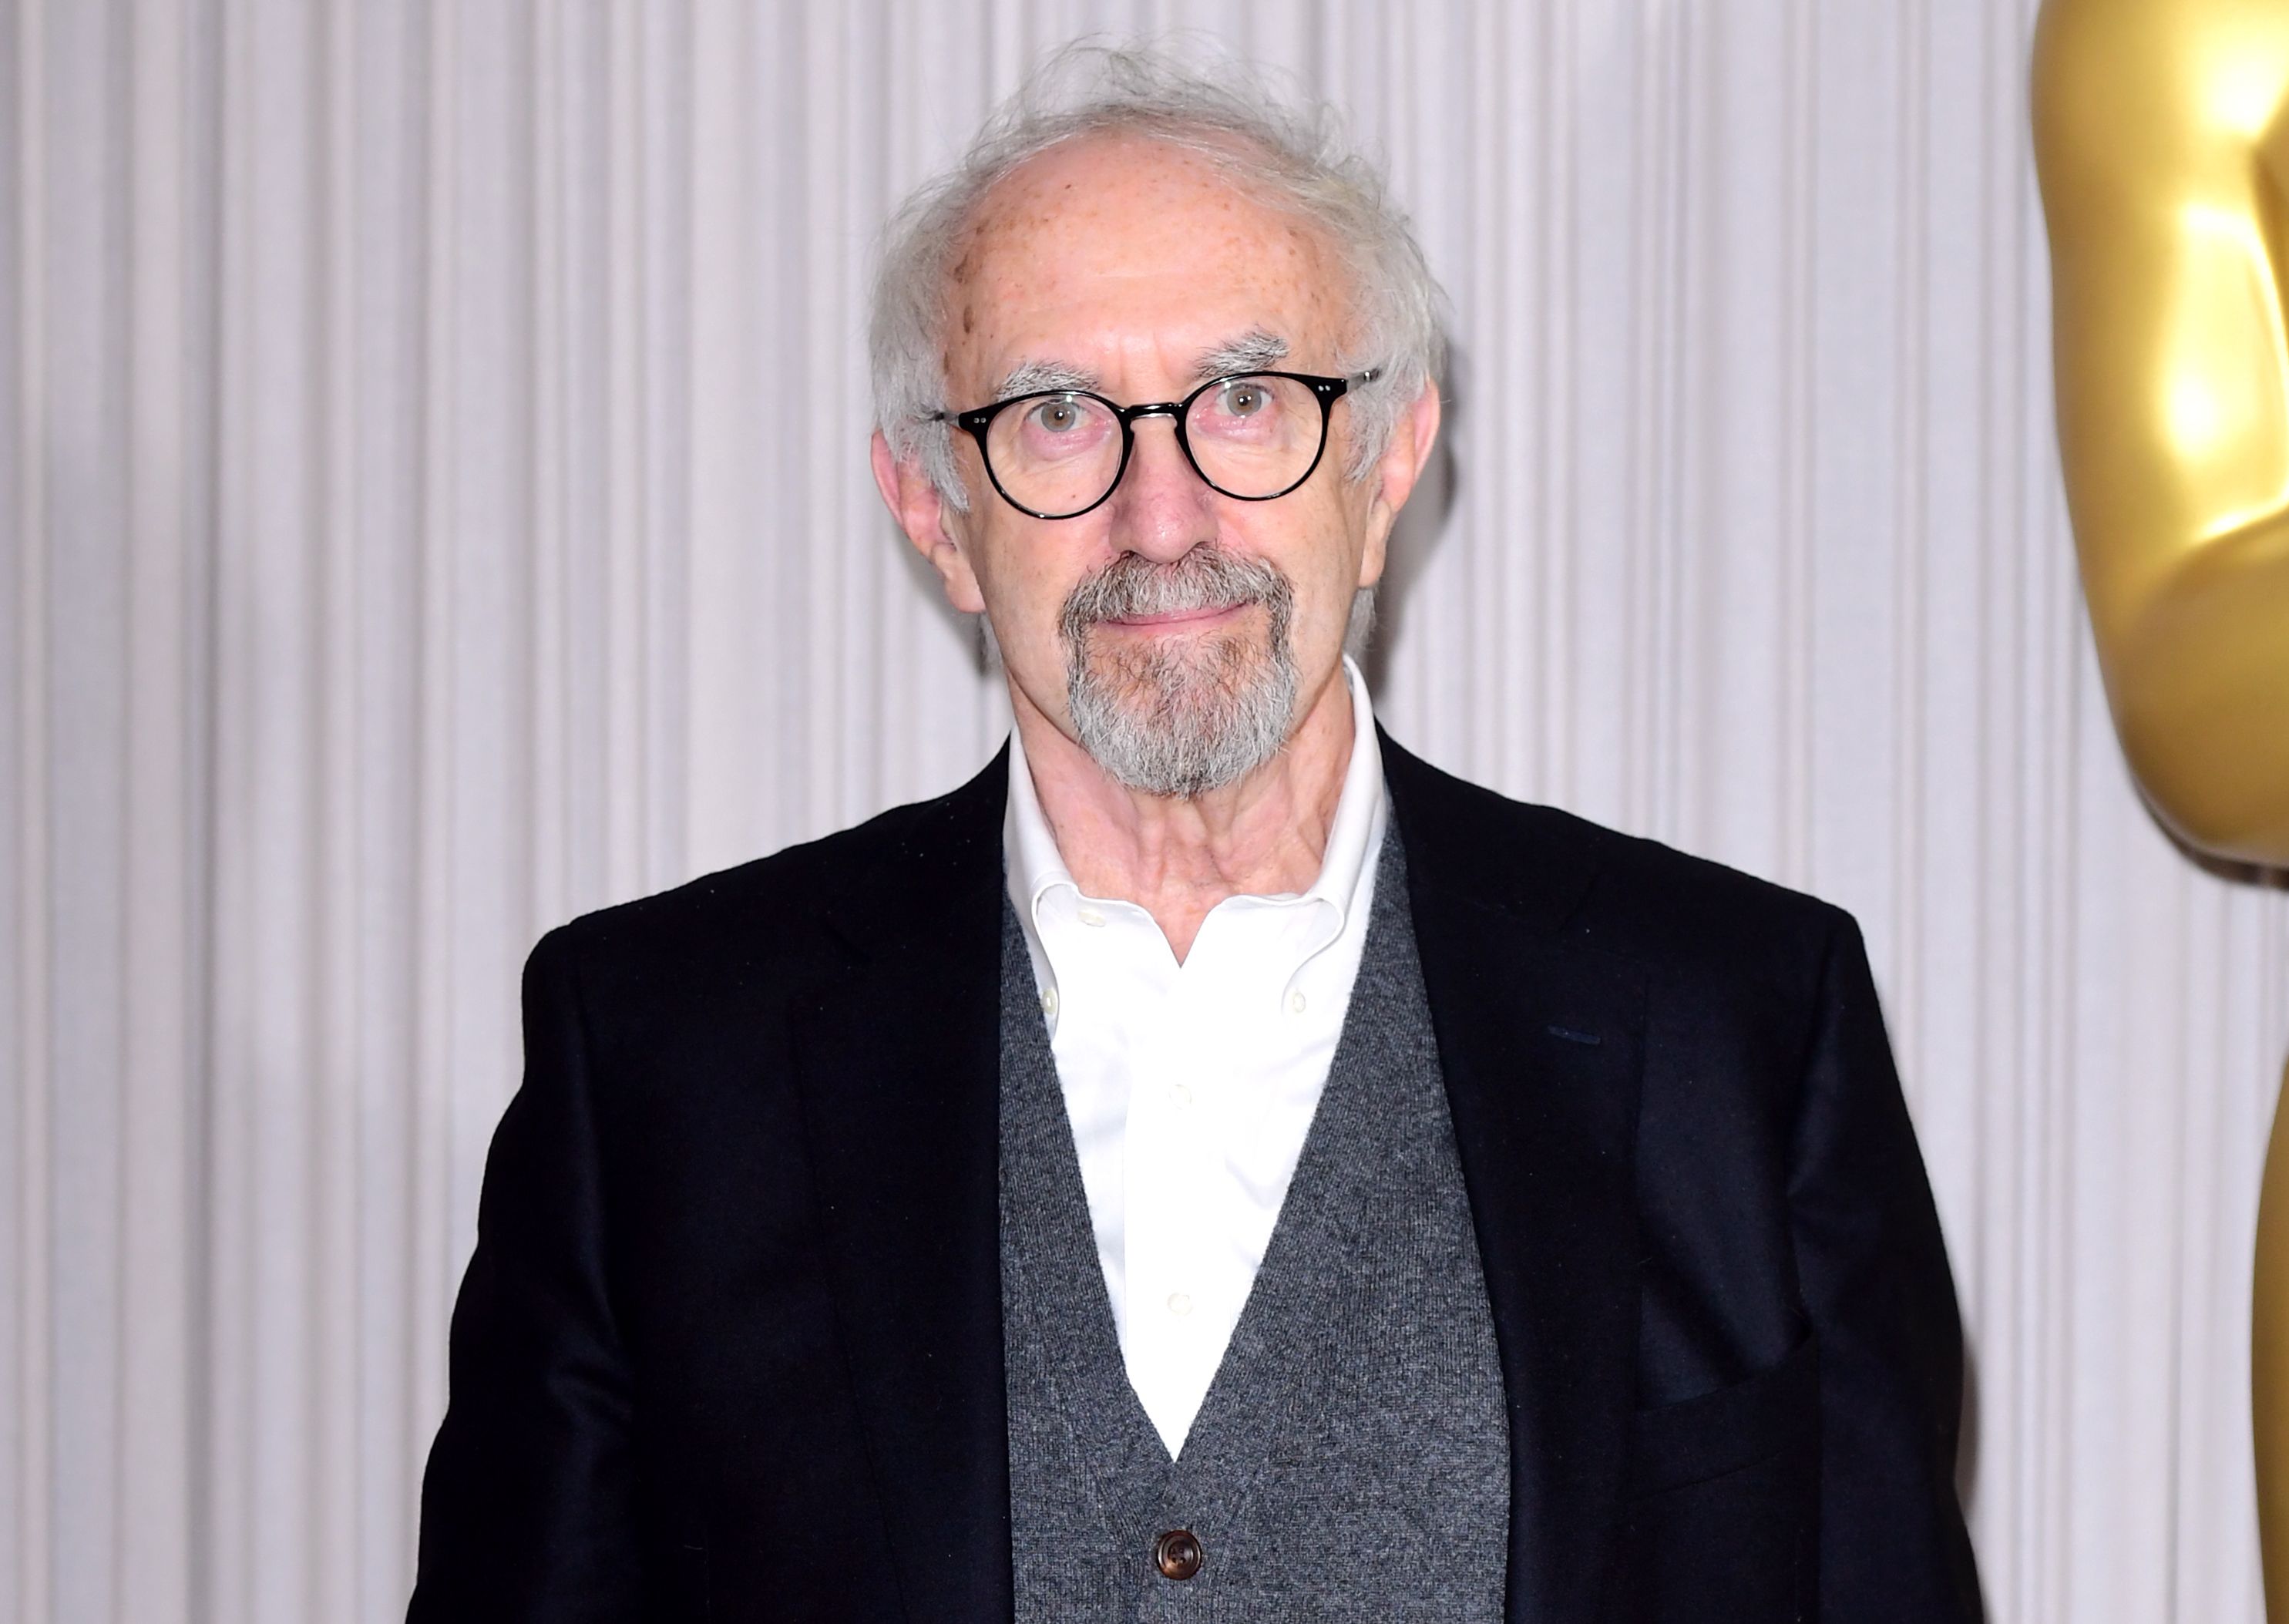 Jonathan Pryce says he has been a 'reluctant viewer' of the show.